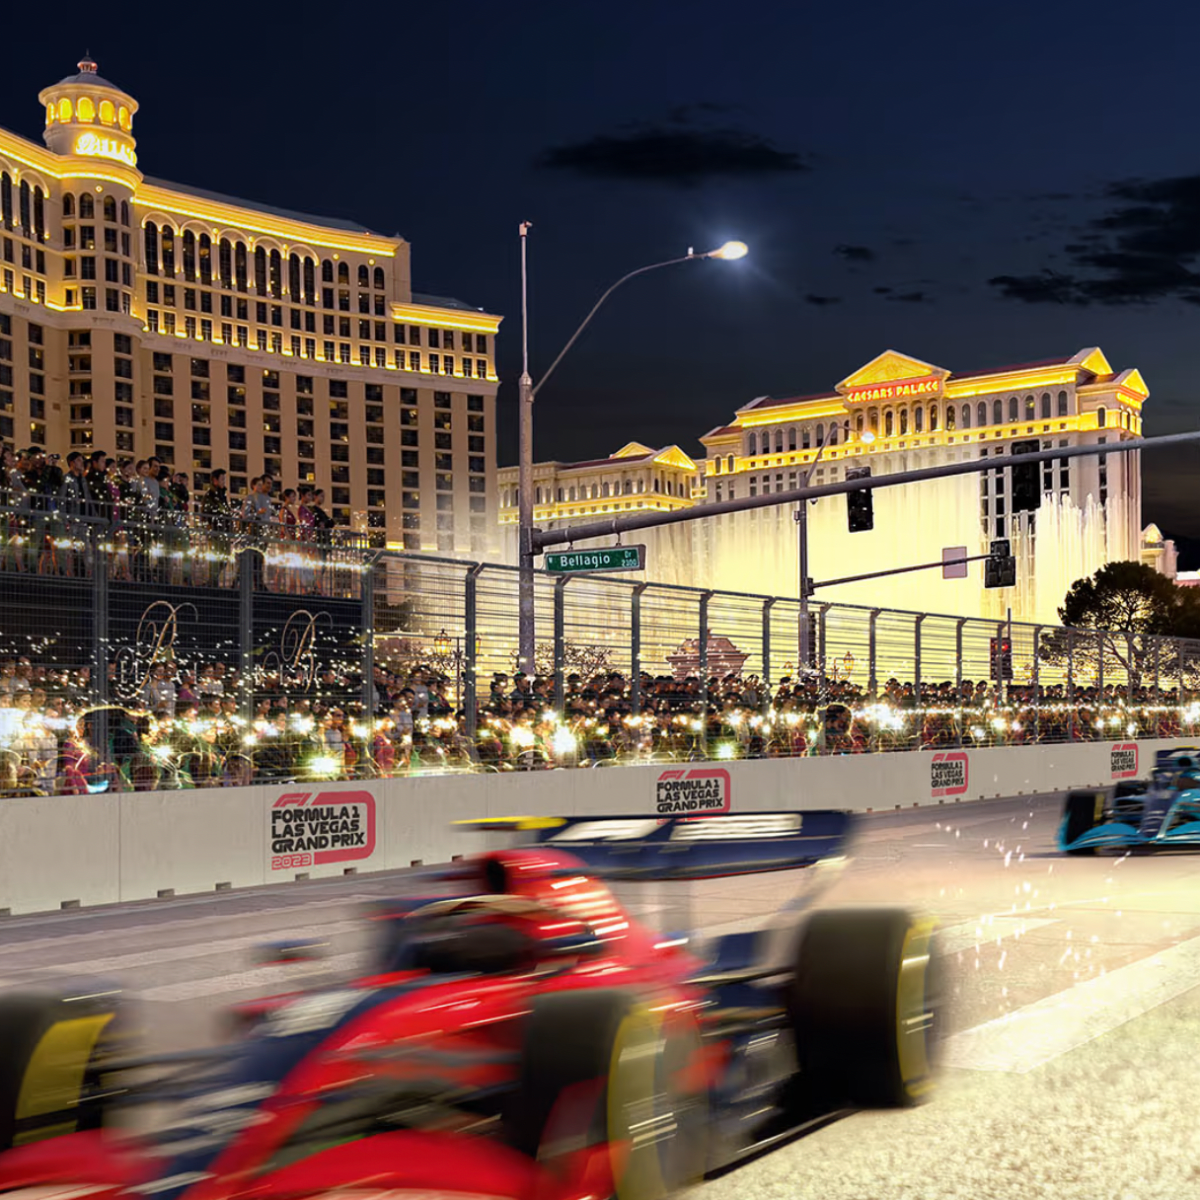 Five Things to Watch at the 2023 Las Vegas Grand Prix - Sports Illustrated